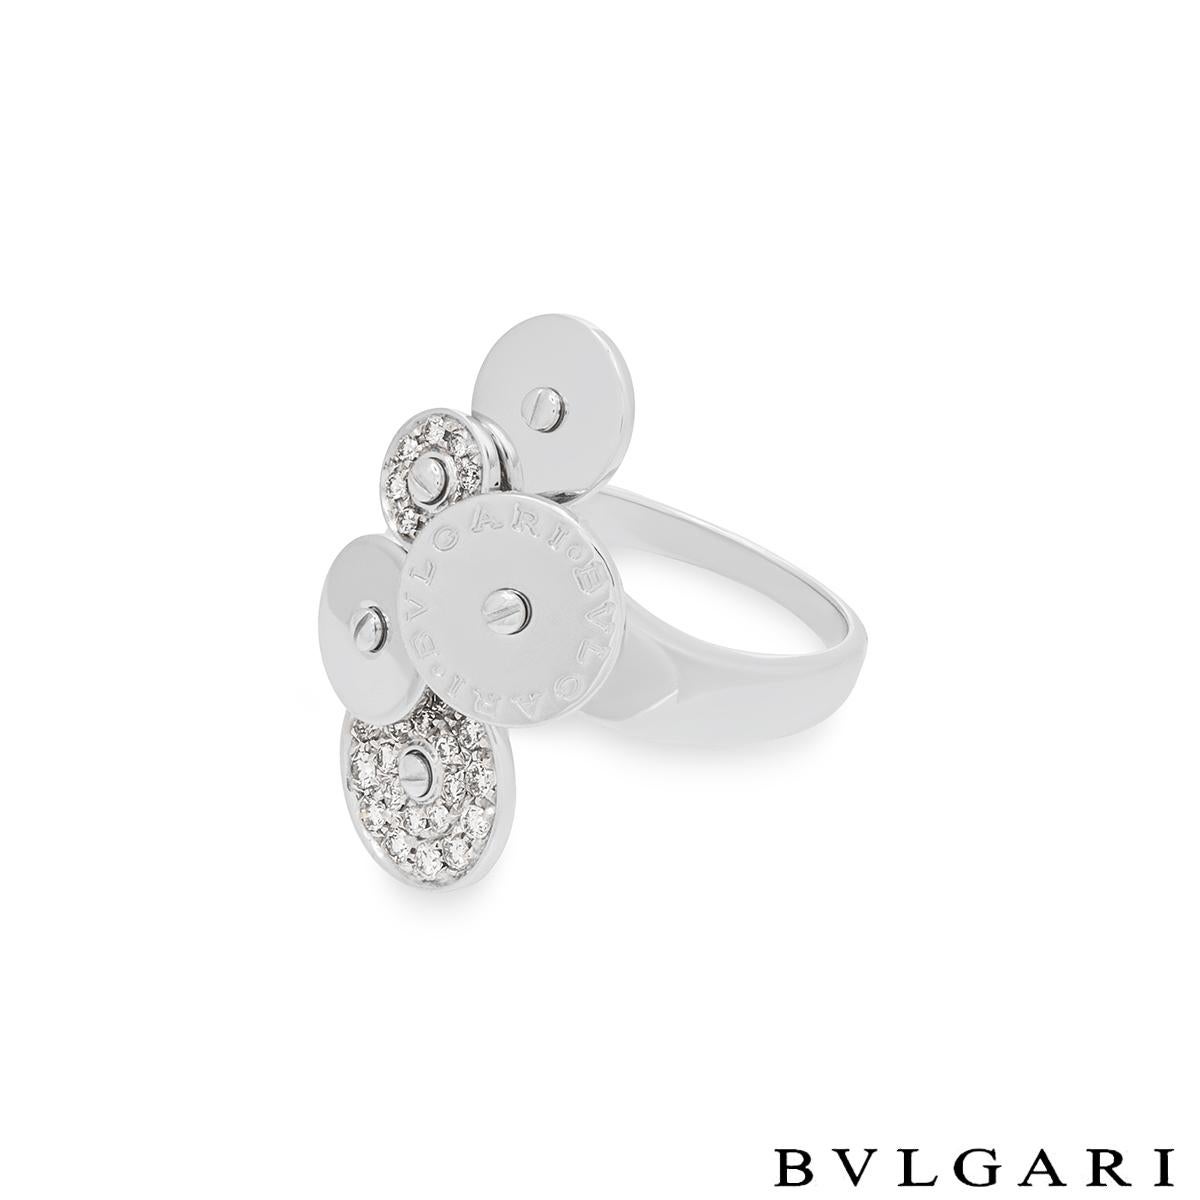 Bvlgari White Gold Diamond Cicladi Ring In Excellent Condition For Sale In London, GB